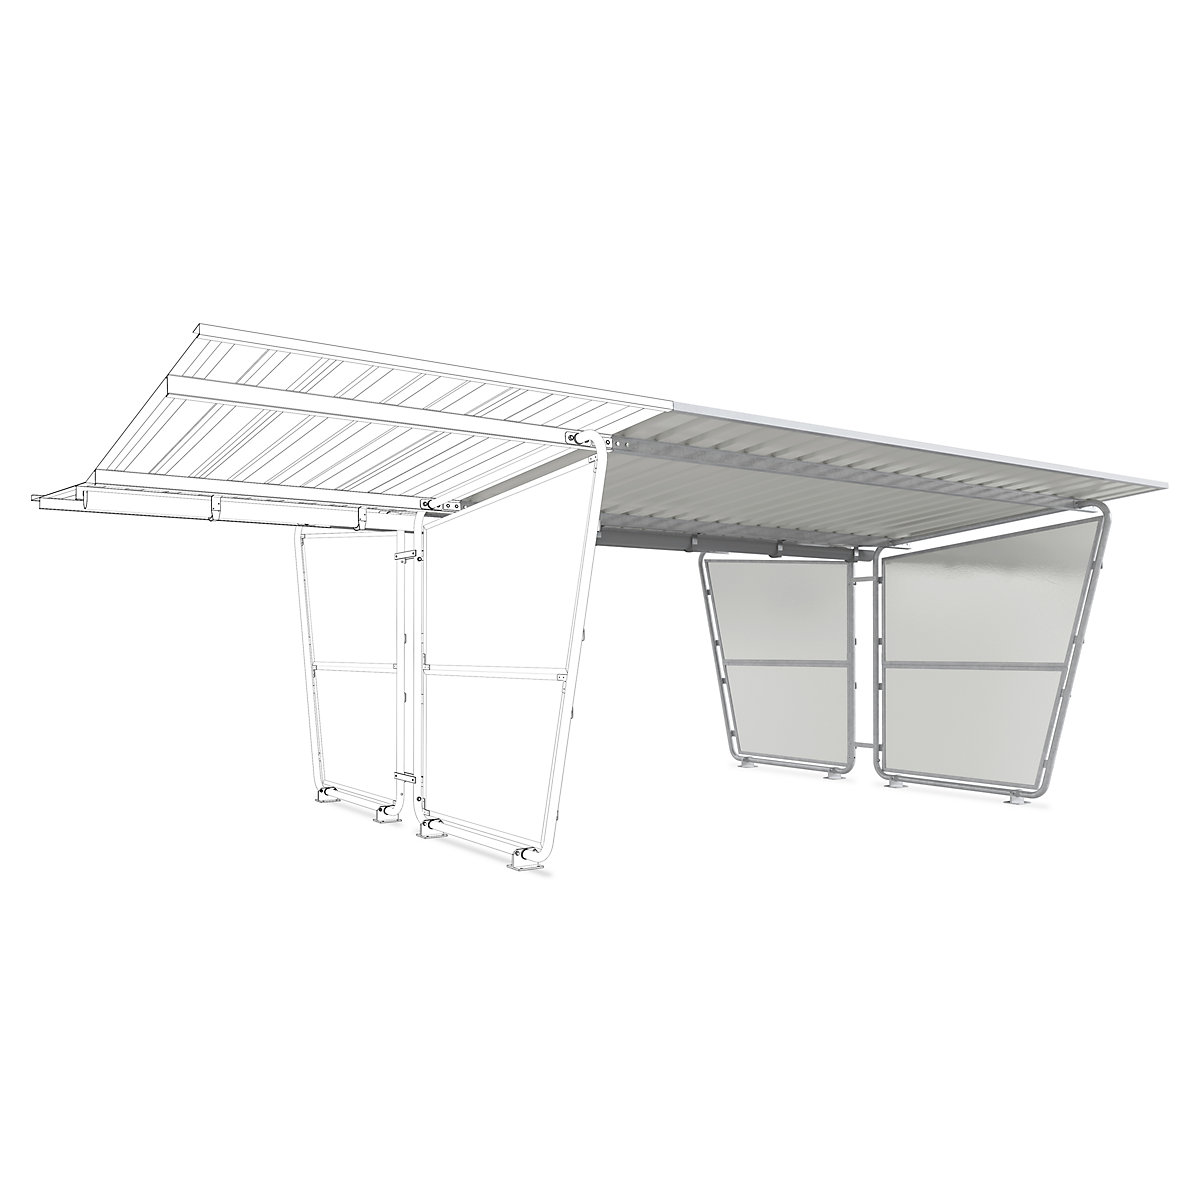 Shelter, extension unit, double sided, made of profiled metal sheet, depth 4660 mm-4